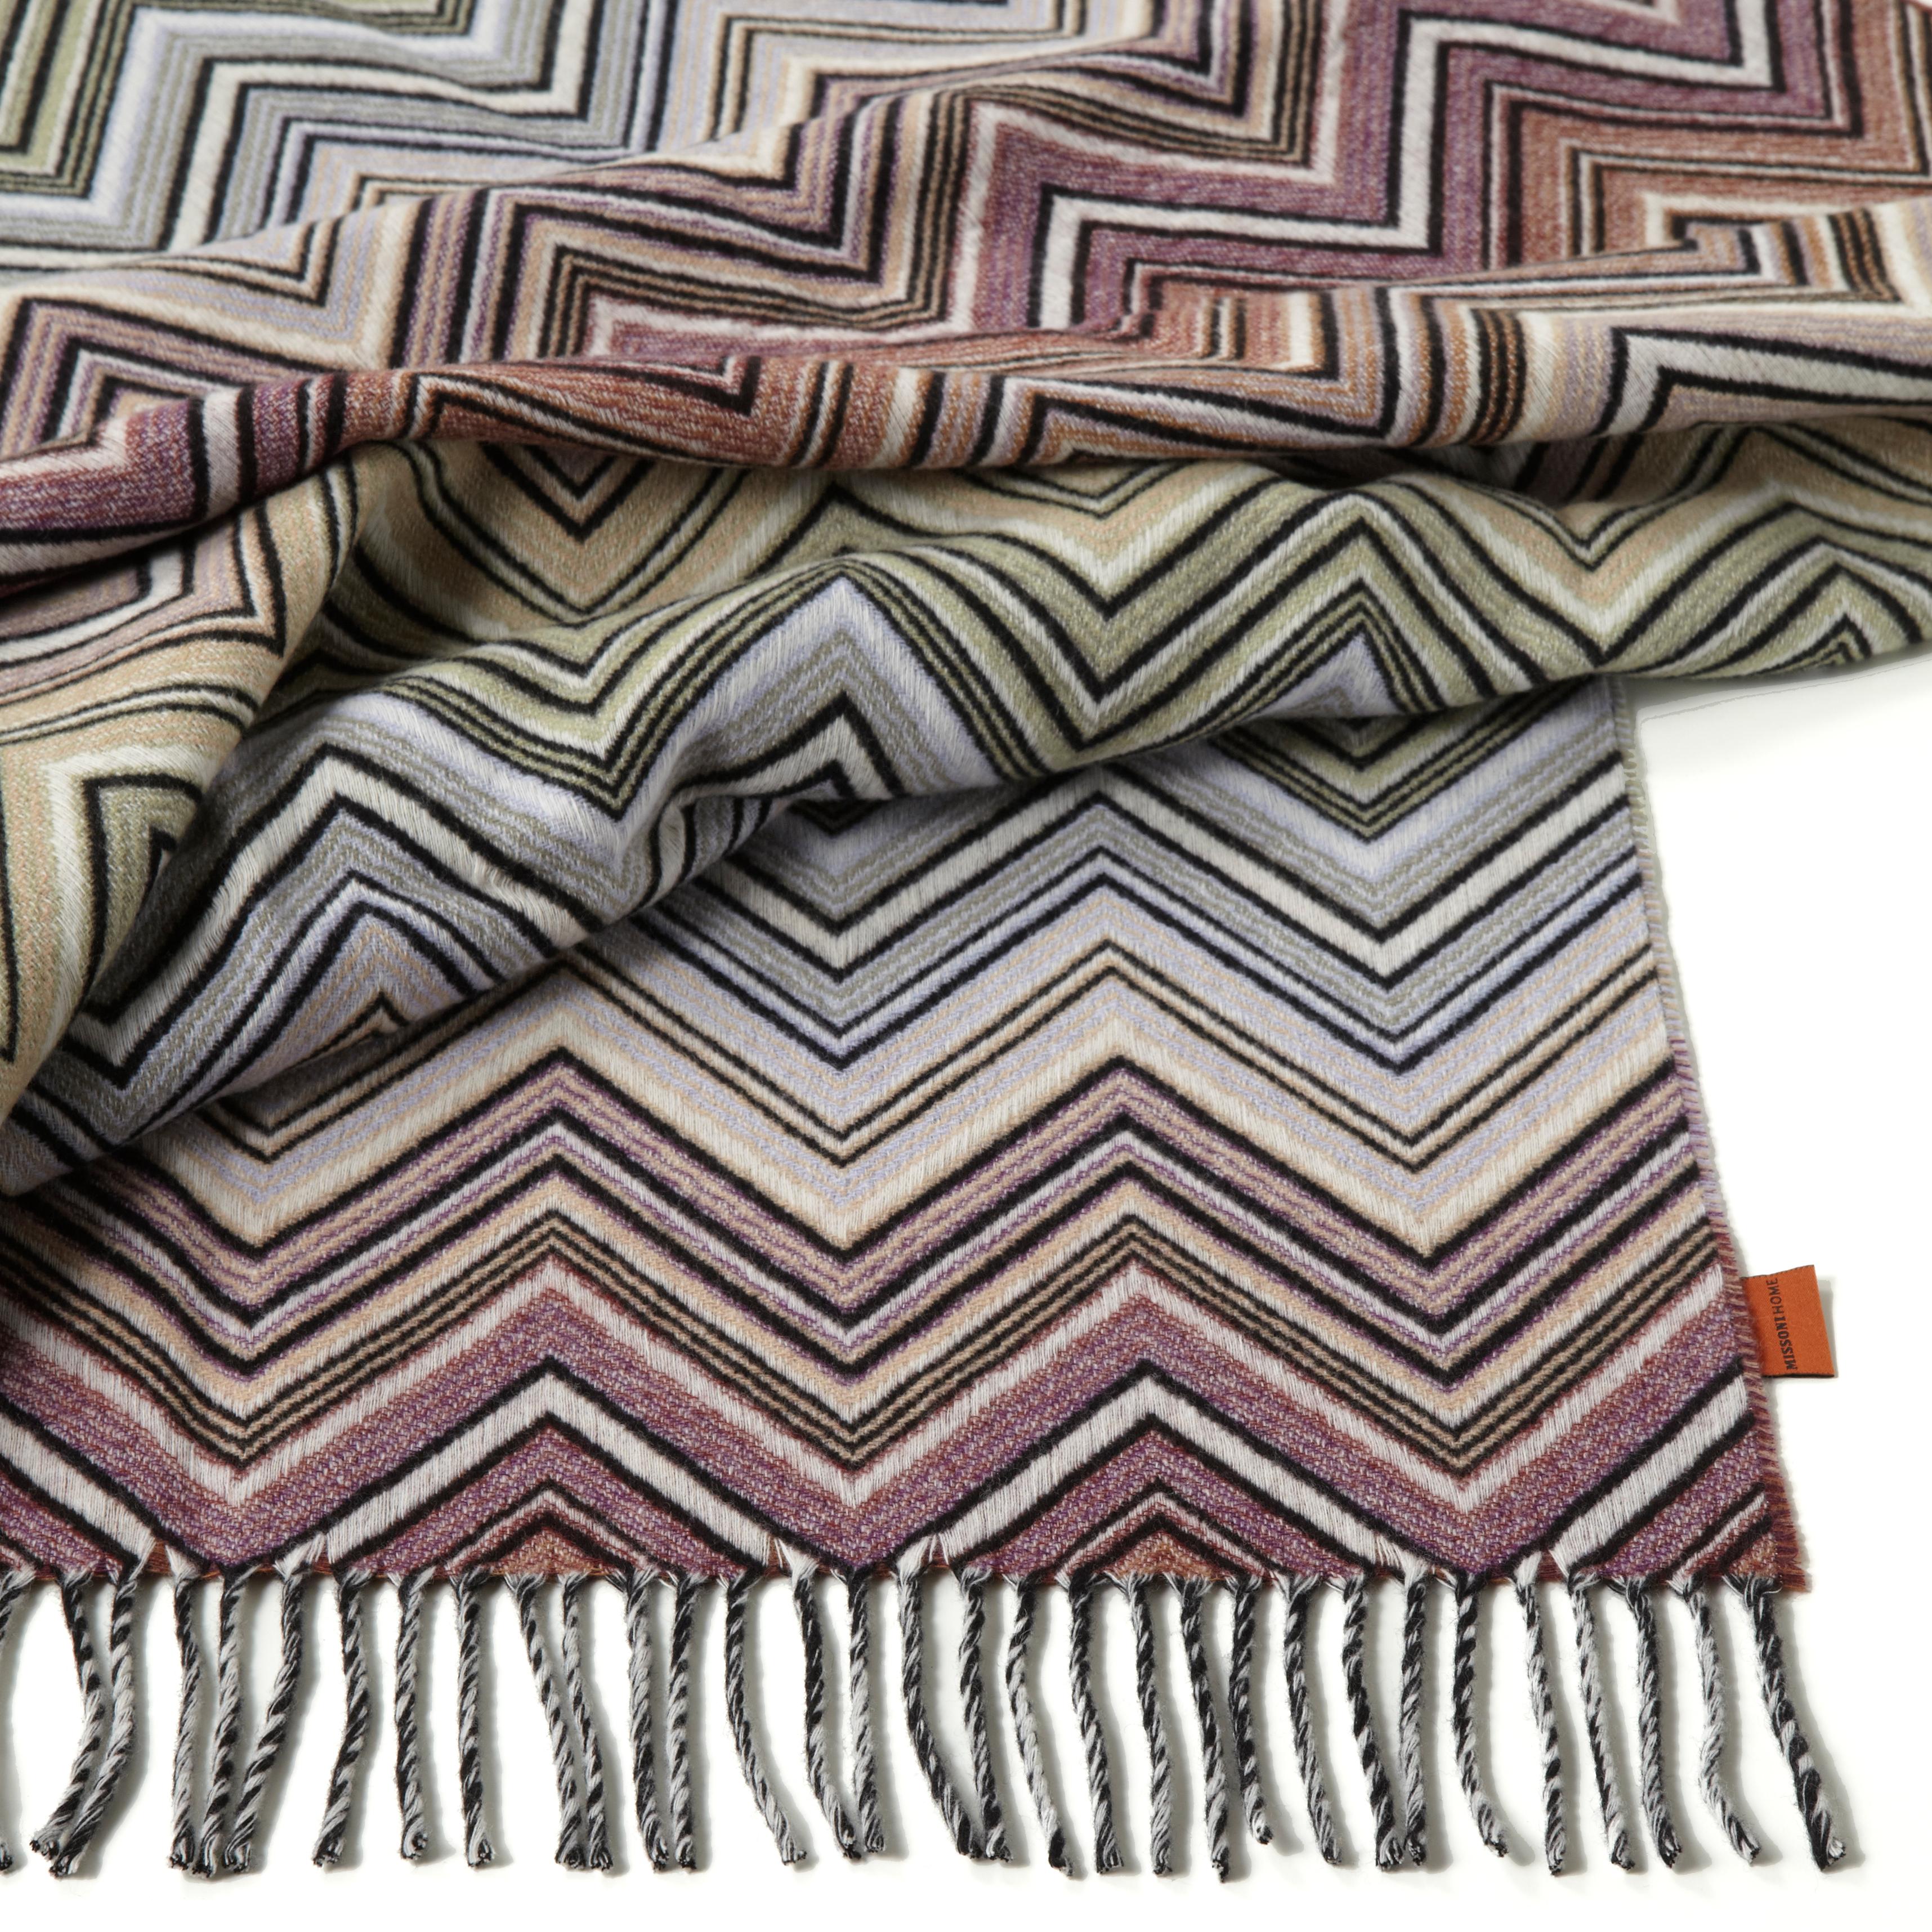 Wool and Cashmere throw in multicolor chevron. Presented in a branded gift box. Perfect for adding an elegant touch to any bedroom or living room.

Composition: 90% Wool, 10% Cashmere. Care: delicate dry-clean with perchlorethylene.

